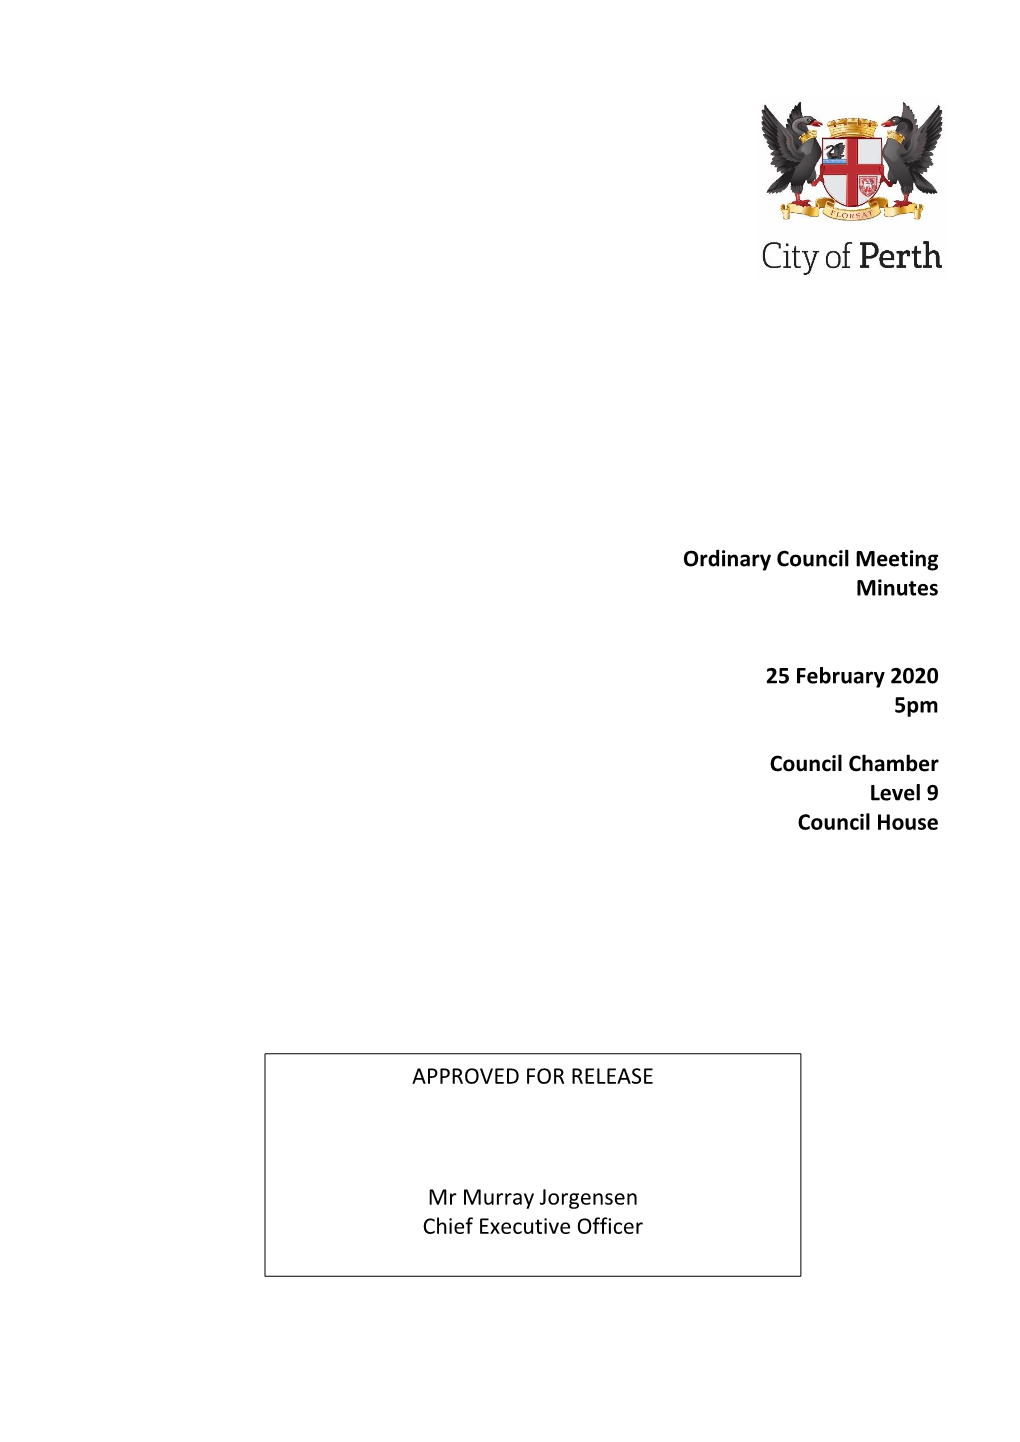 Ordinary Council Meeting Minutes 25 February 2020 5Pm